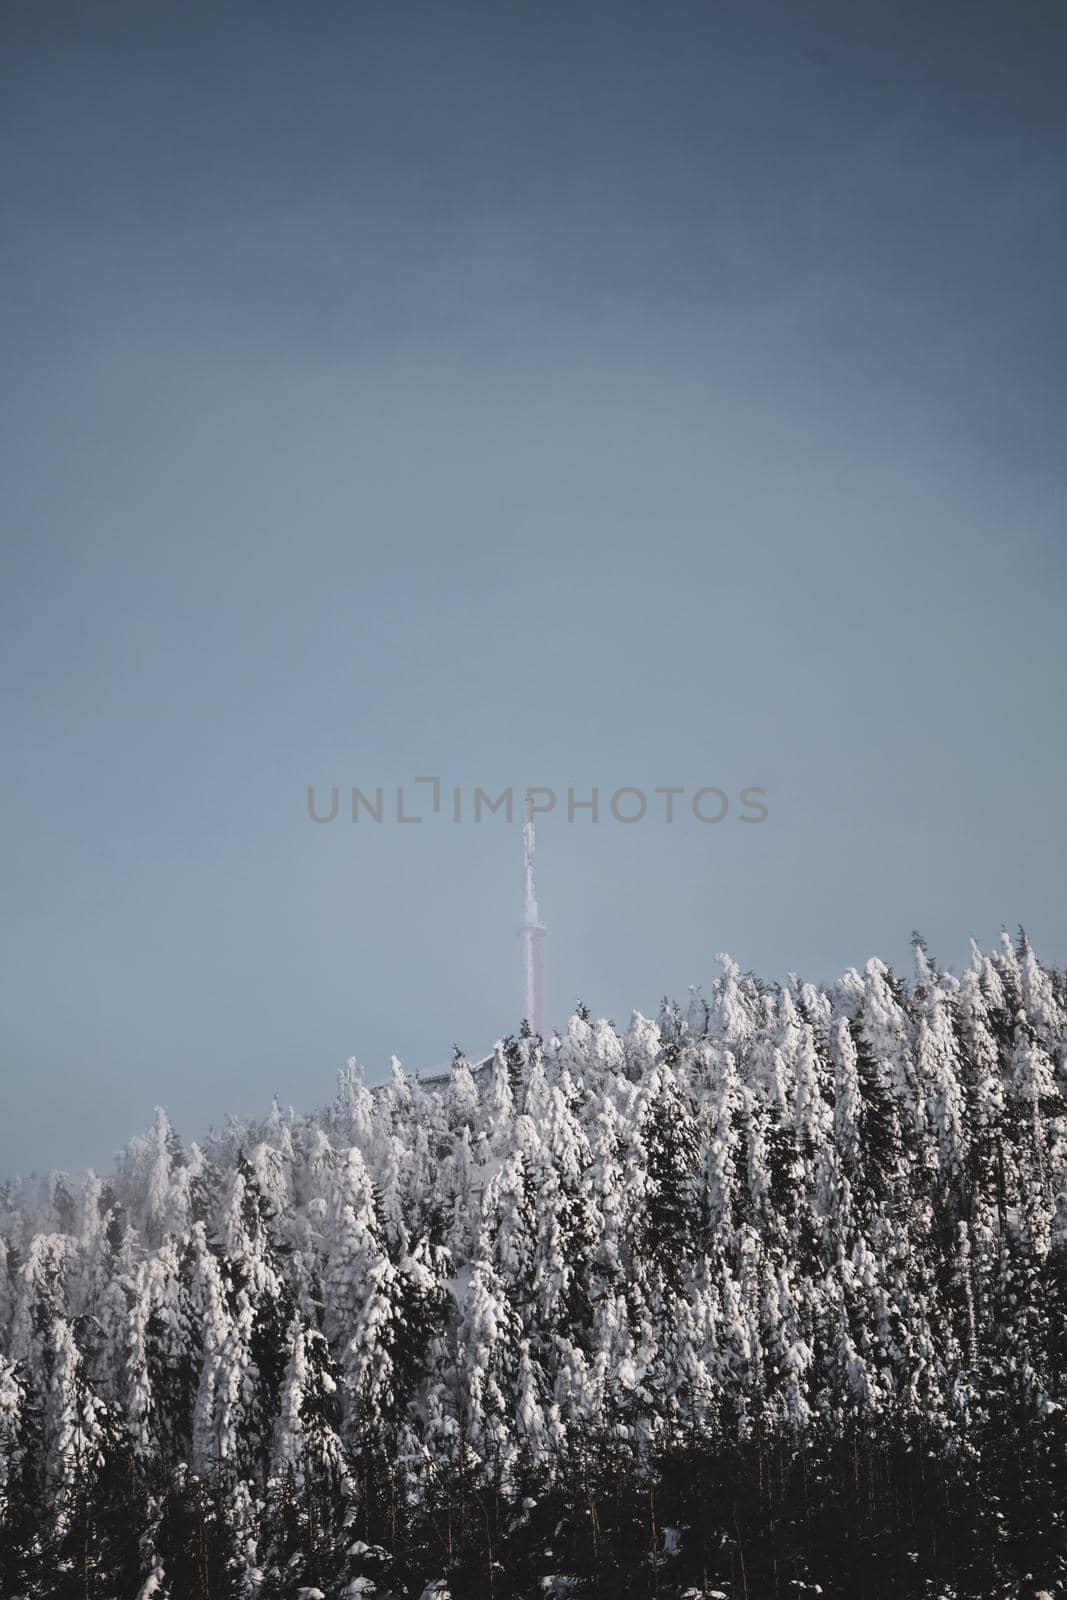 Transmitter at the Top of the Mountain With Snowy Trees and Blue Sky in Czech Republic. High quality photo